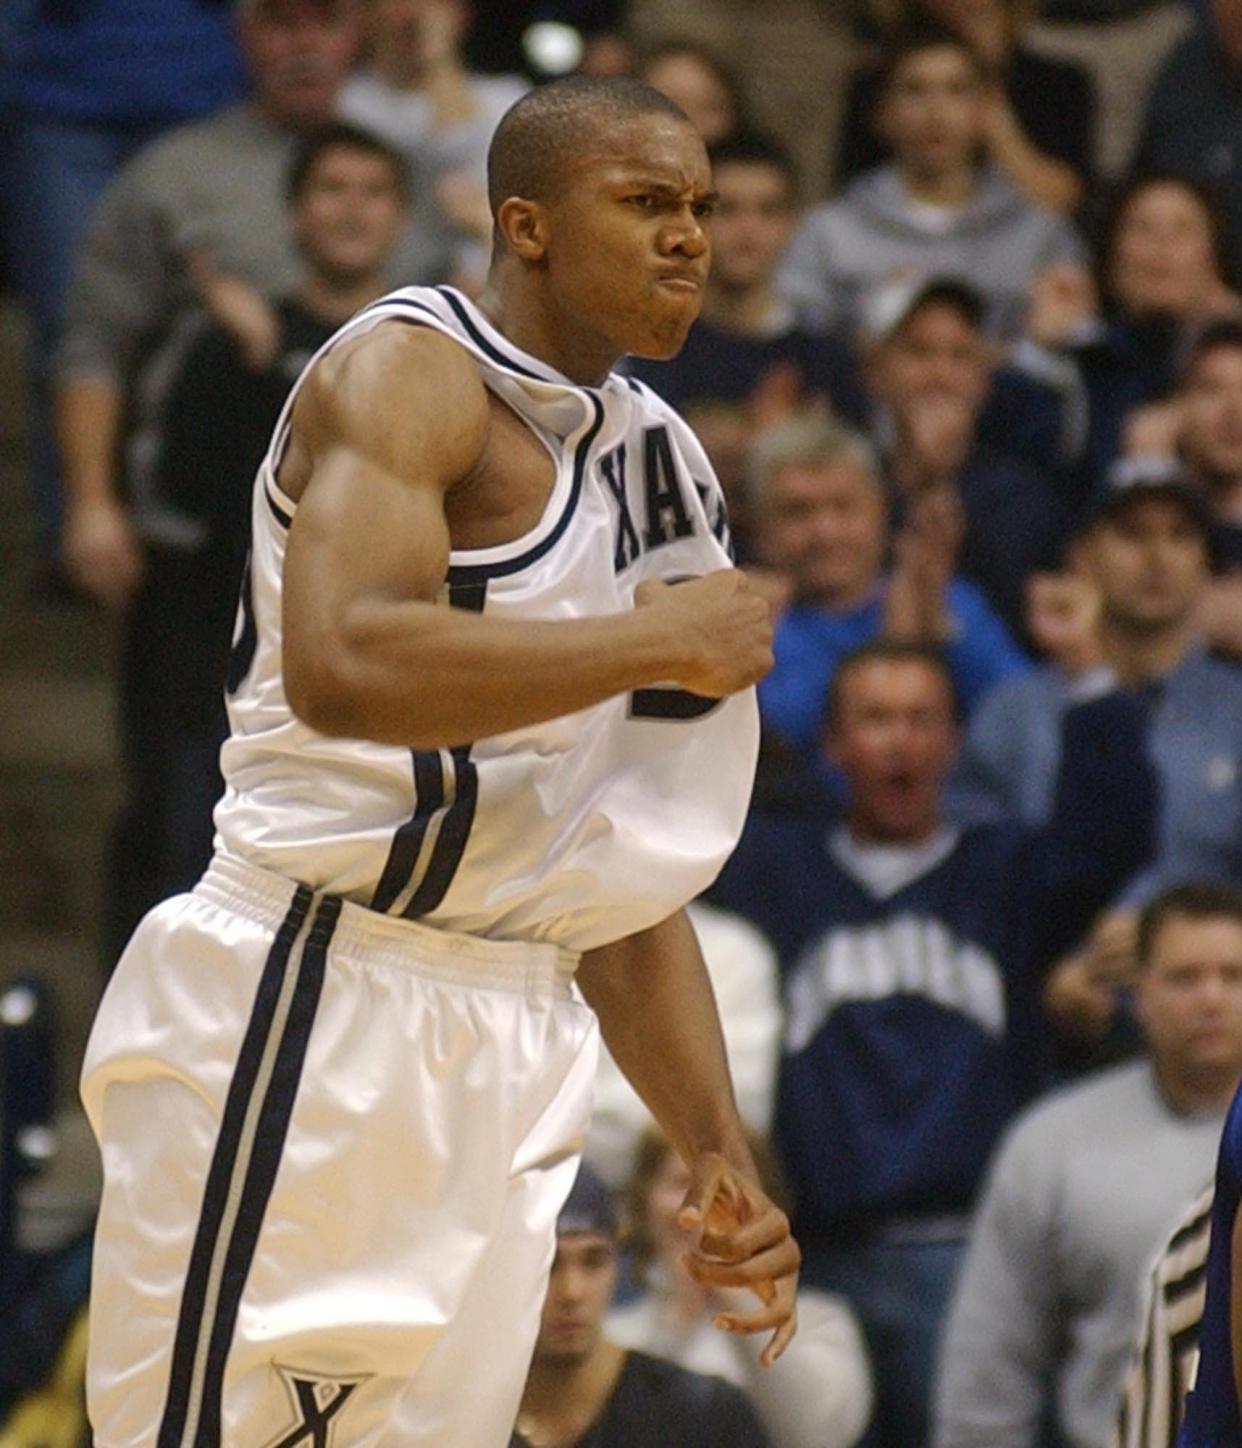 David West was the 2003 National Player of the Year at Xavier.